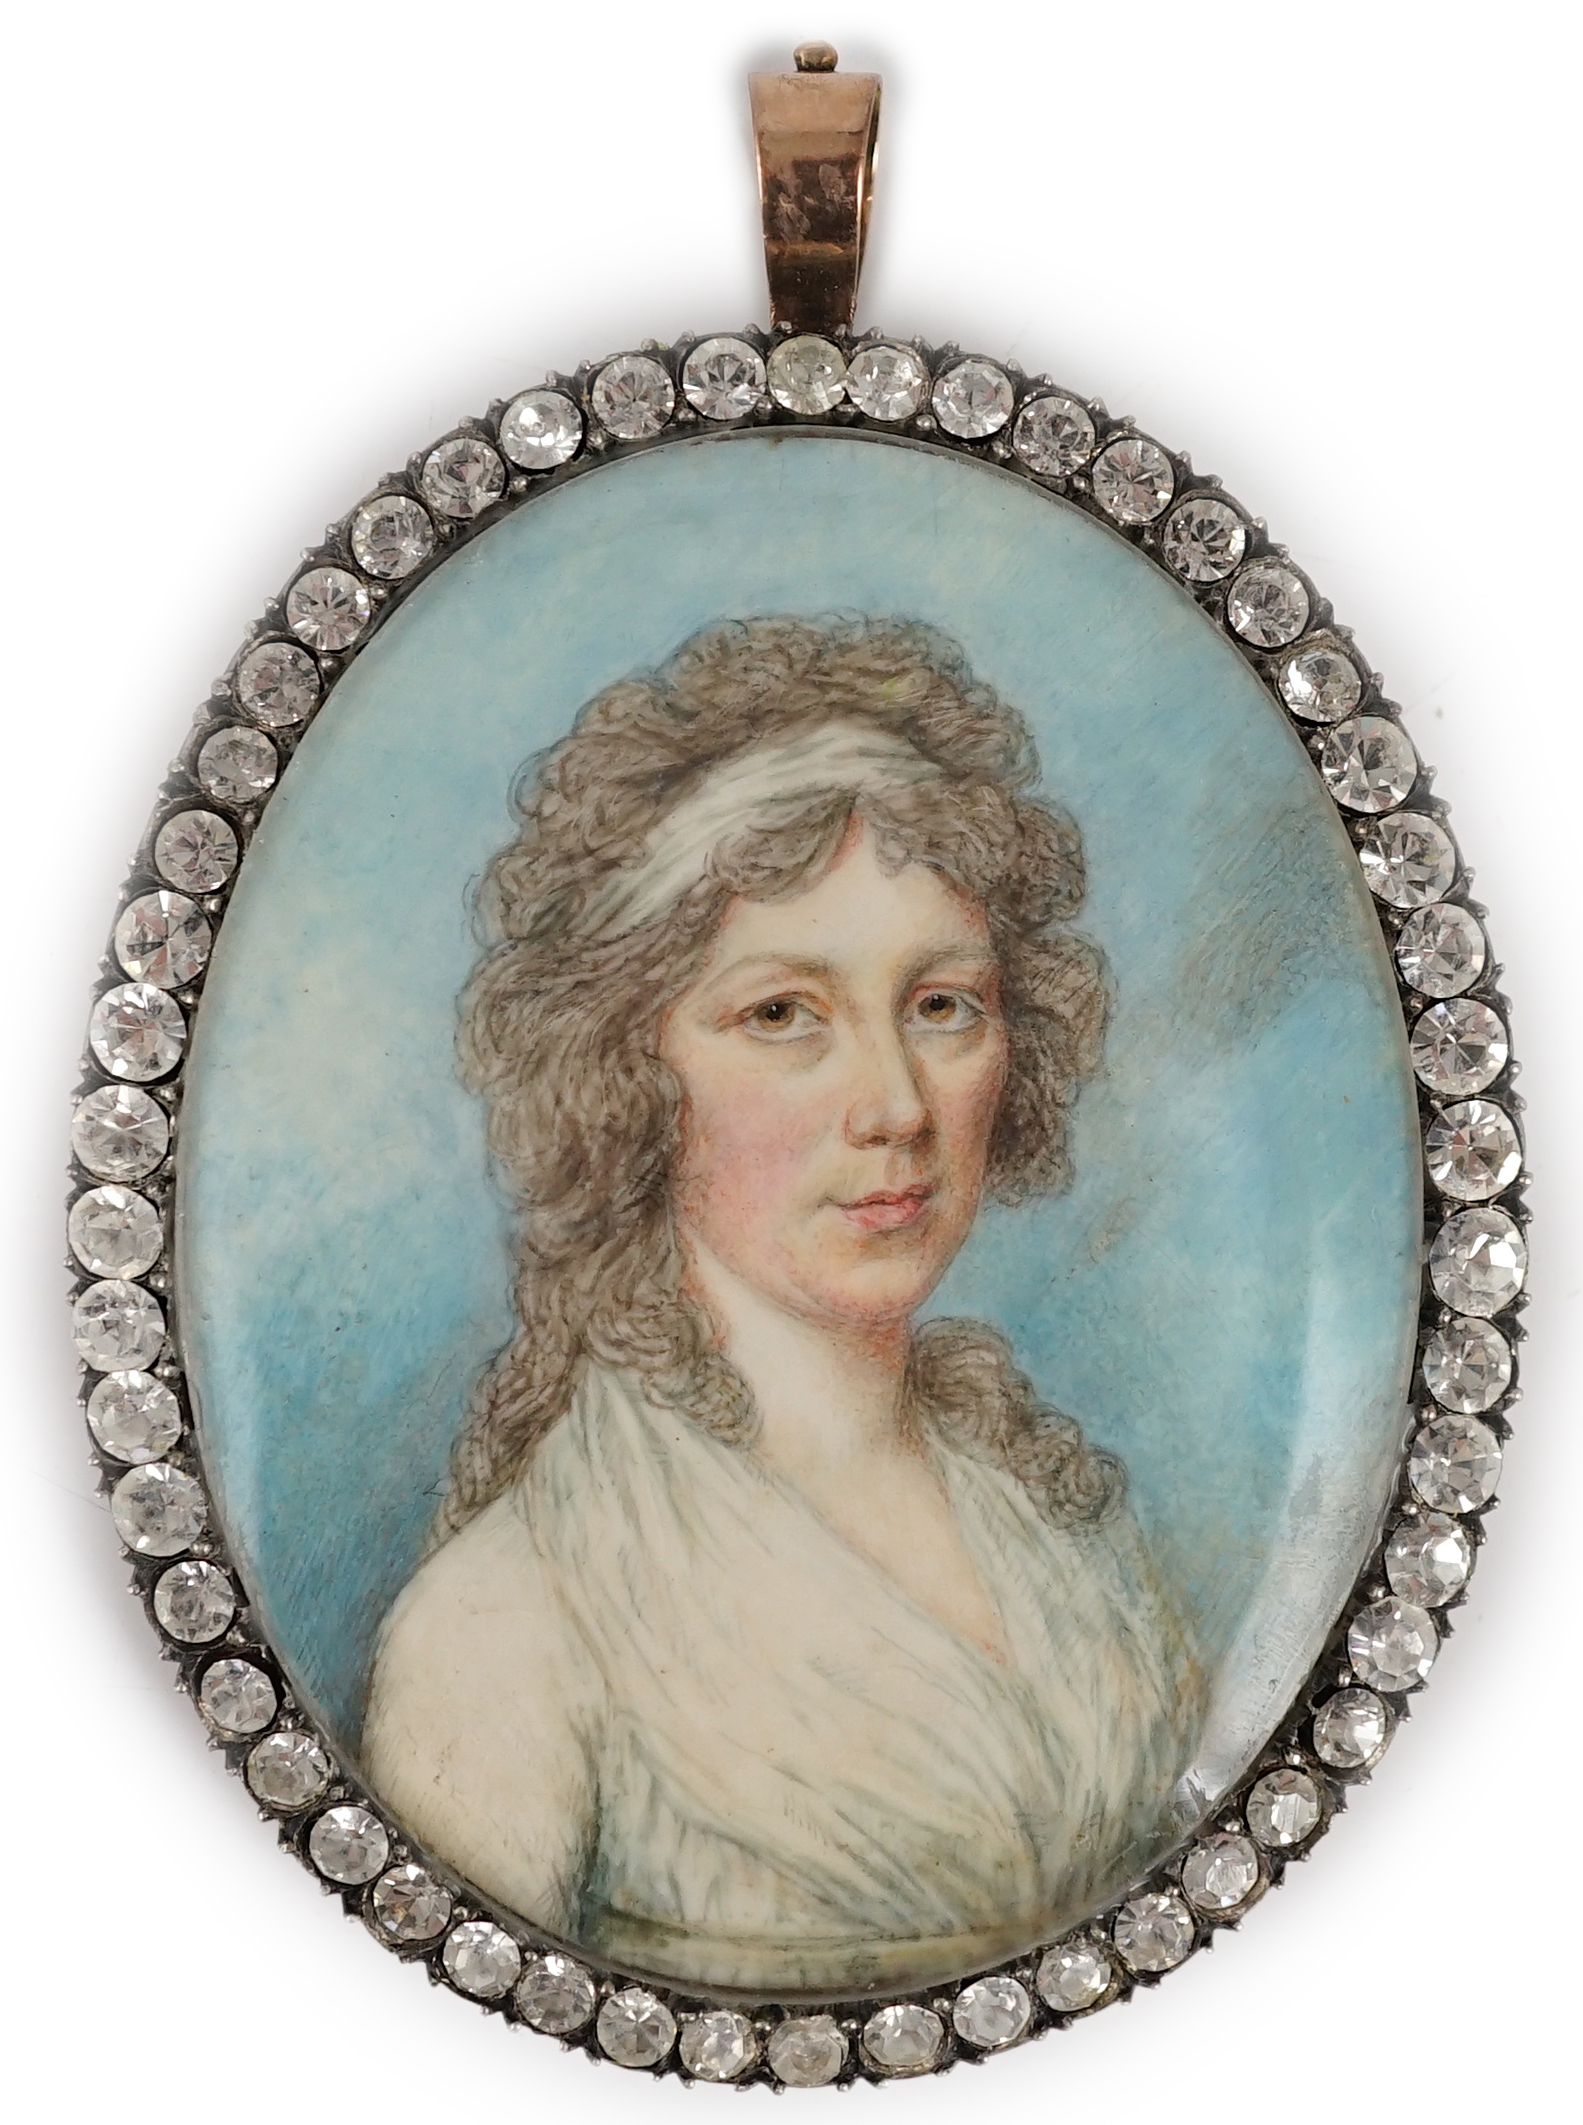 Attributed to N. Freese (British, active 1794-1814), Portrait miniature of a lady, oil on ivory, 6.5 x 5.3cm. CITES Submission reference DPWH5JDK